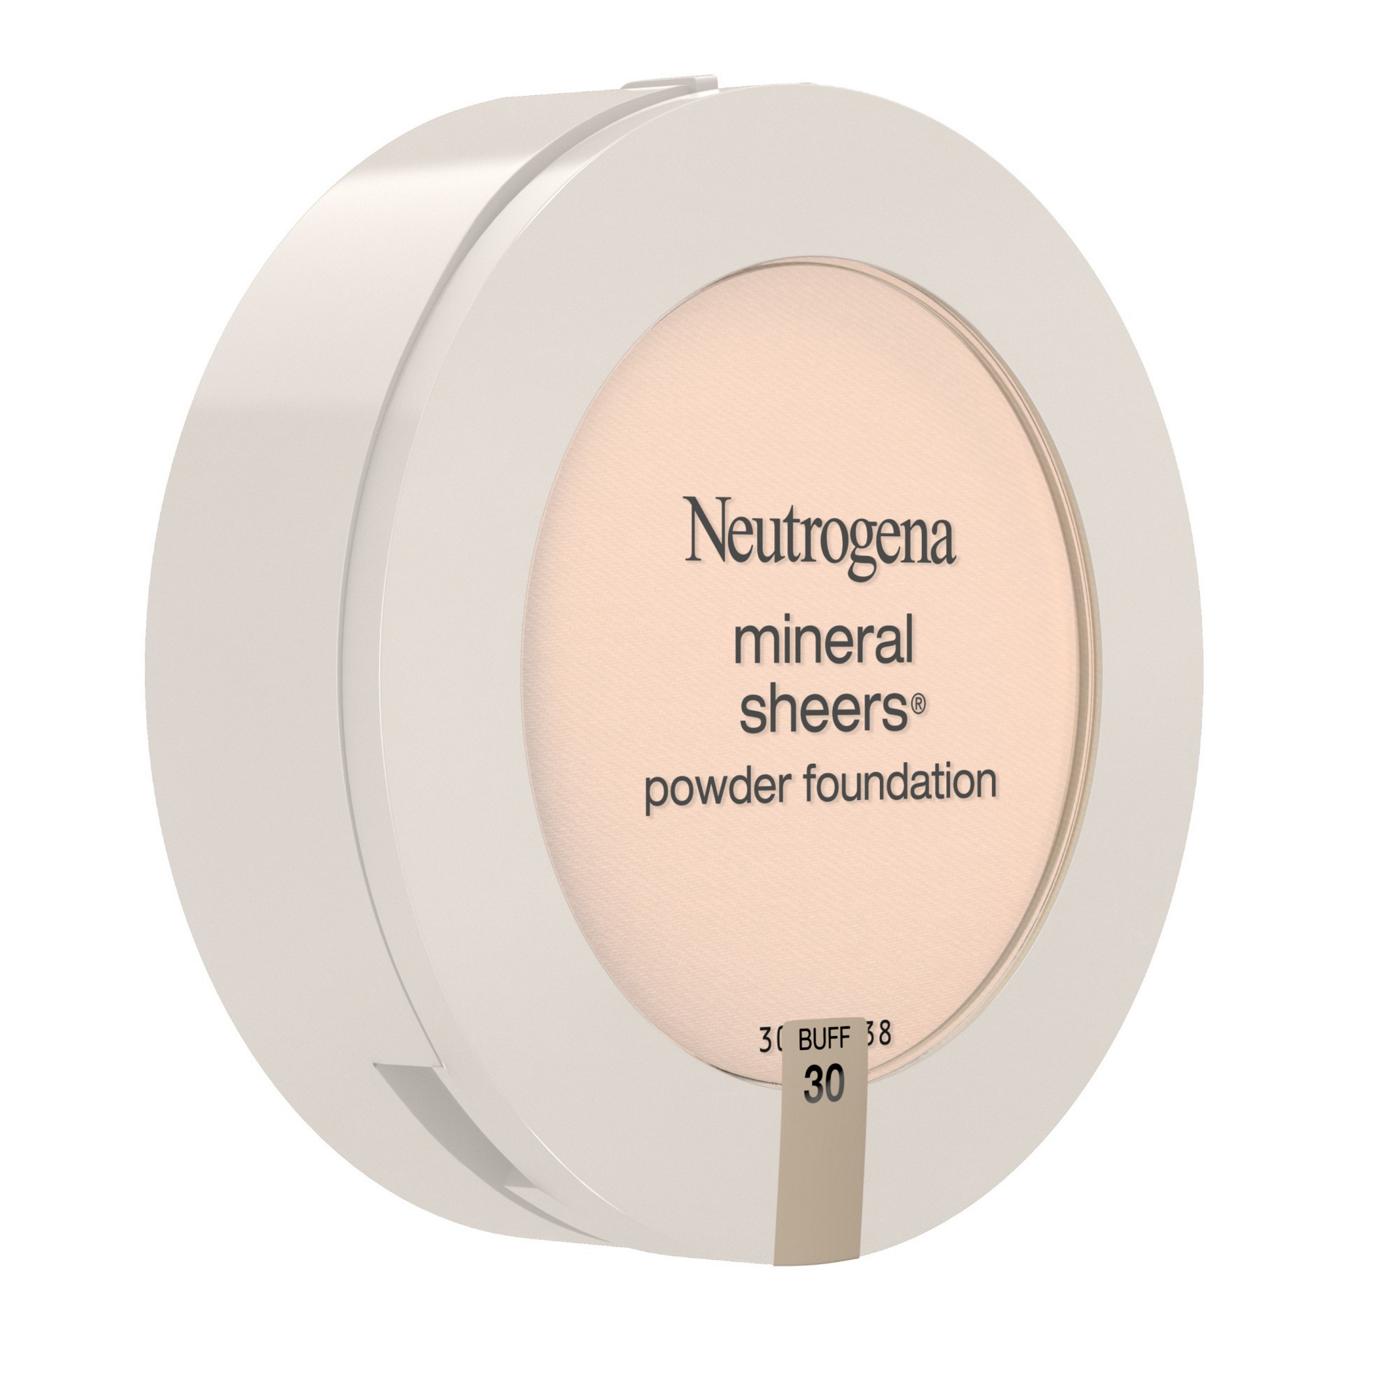 Neutrogena Mineral Sheers Compact Powder Foundation 30 Buff; image 3 of 6